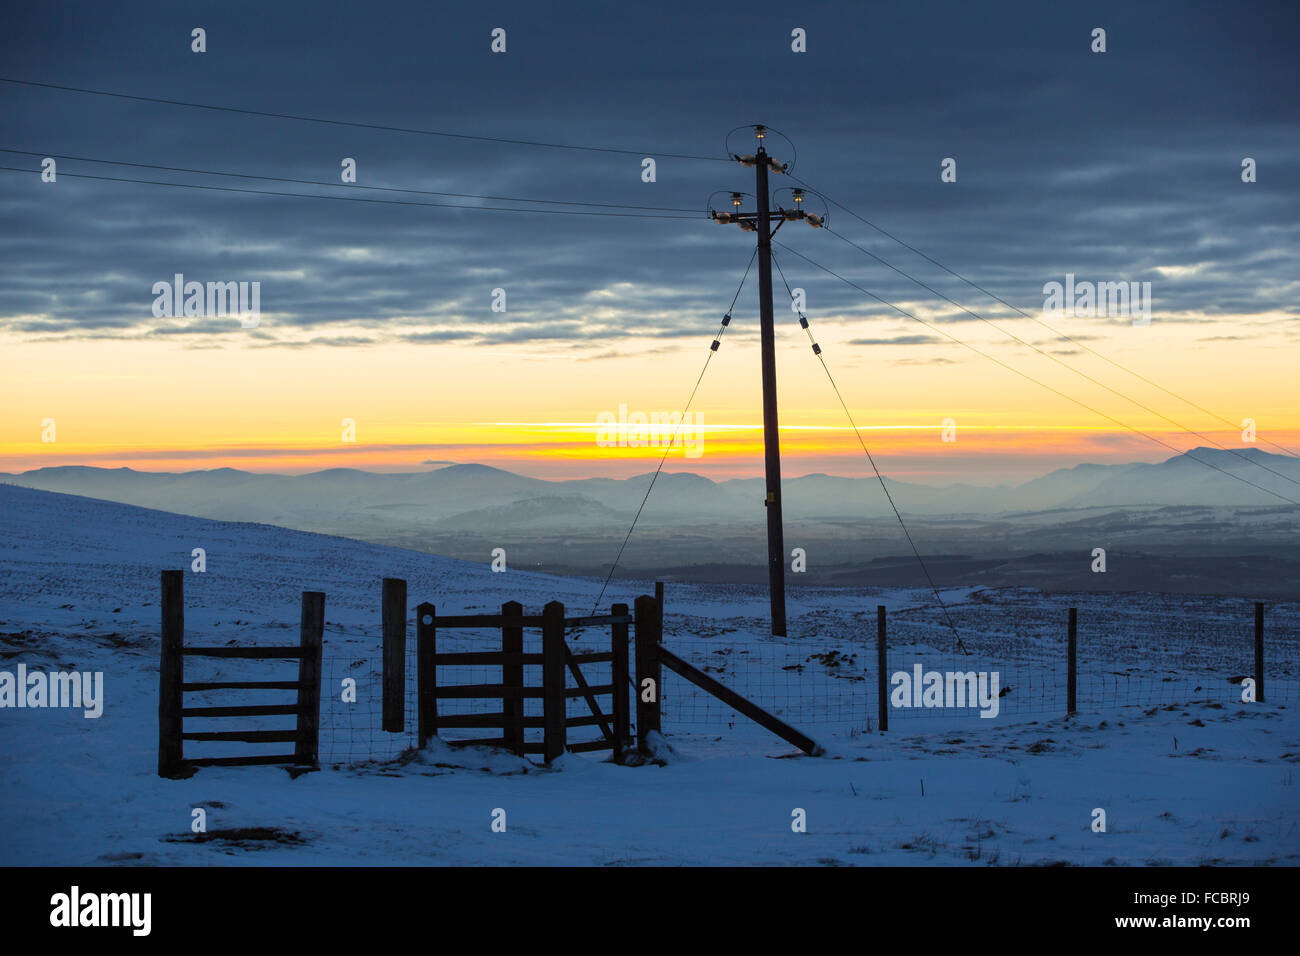 Looking towards the Lake District hills from Hartside in the North Pennines at sunset with an electricity pylon. Stock Photo